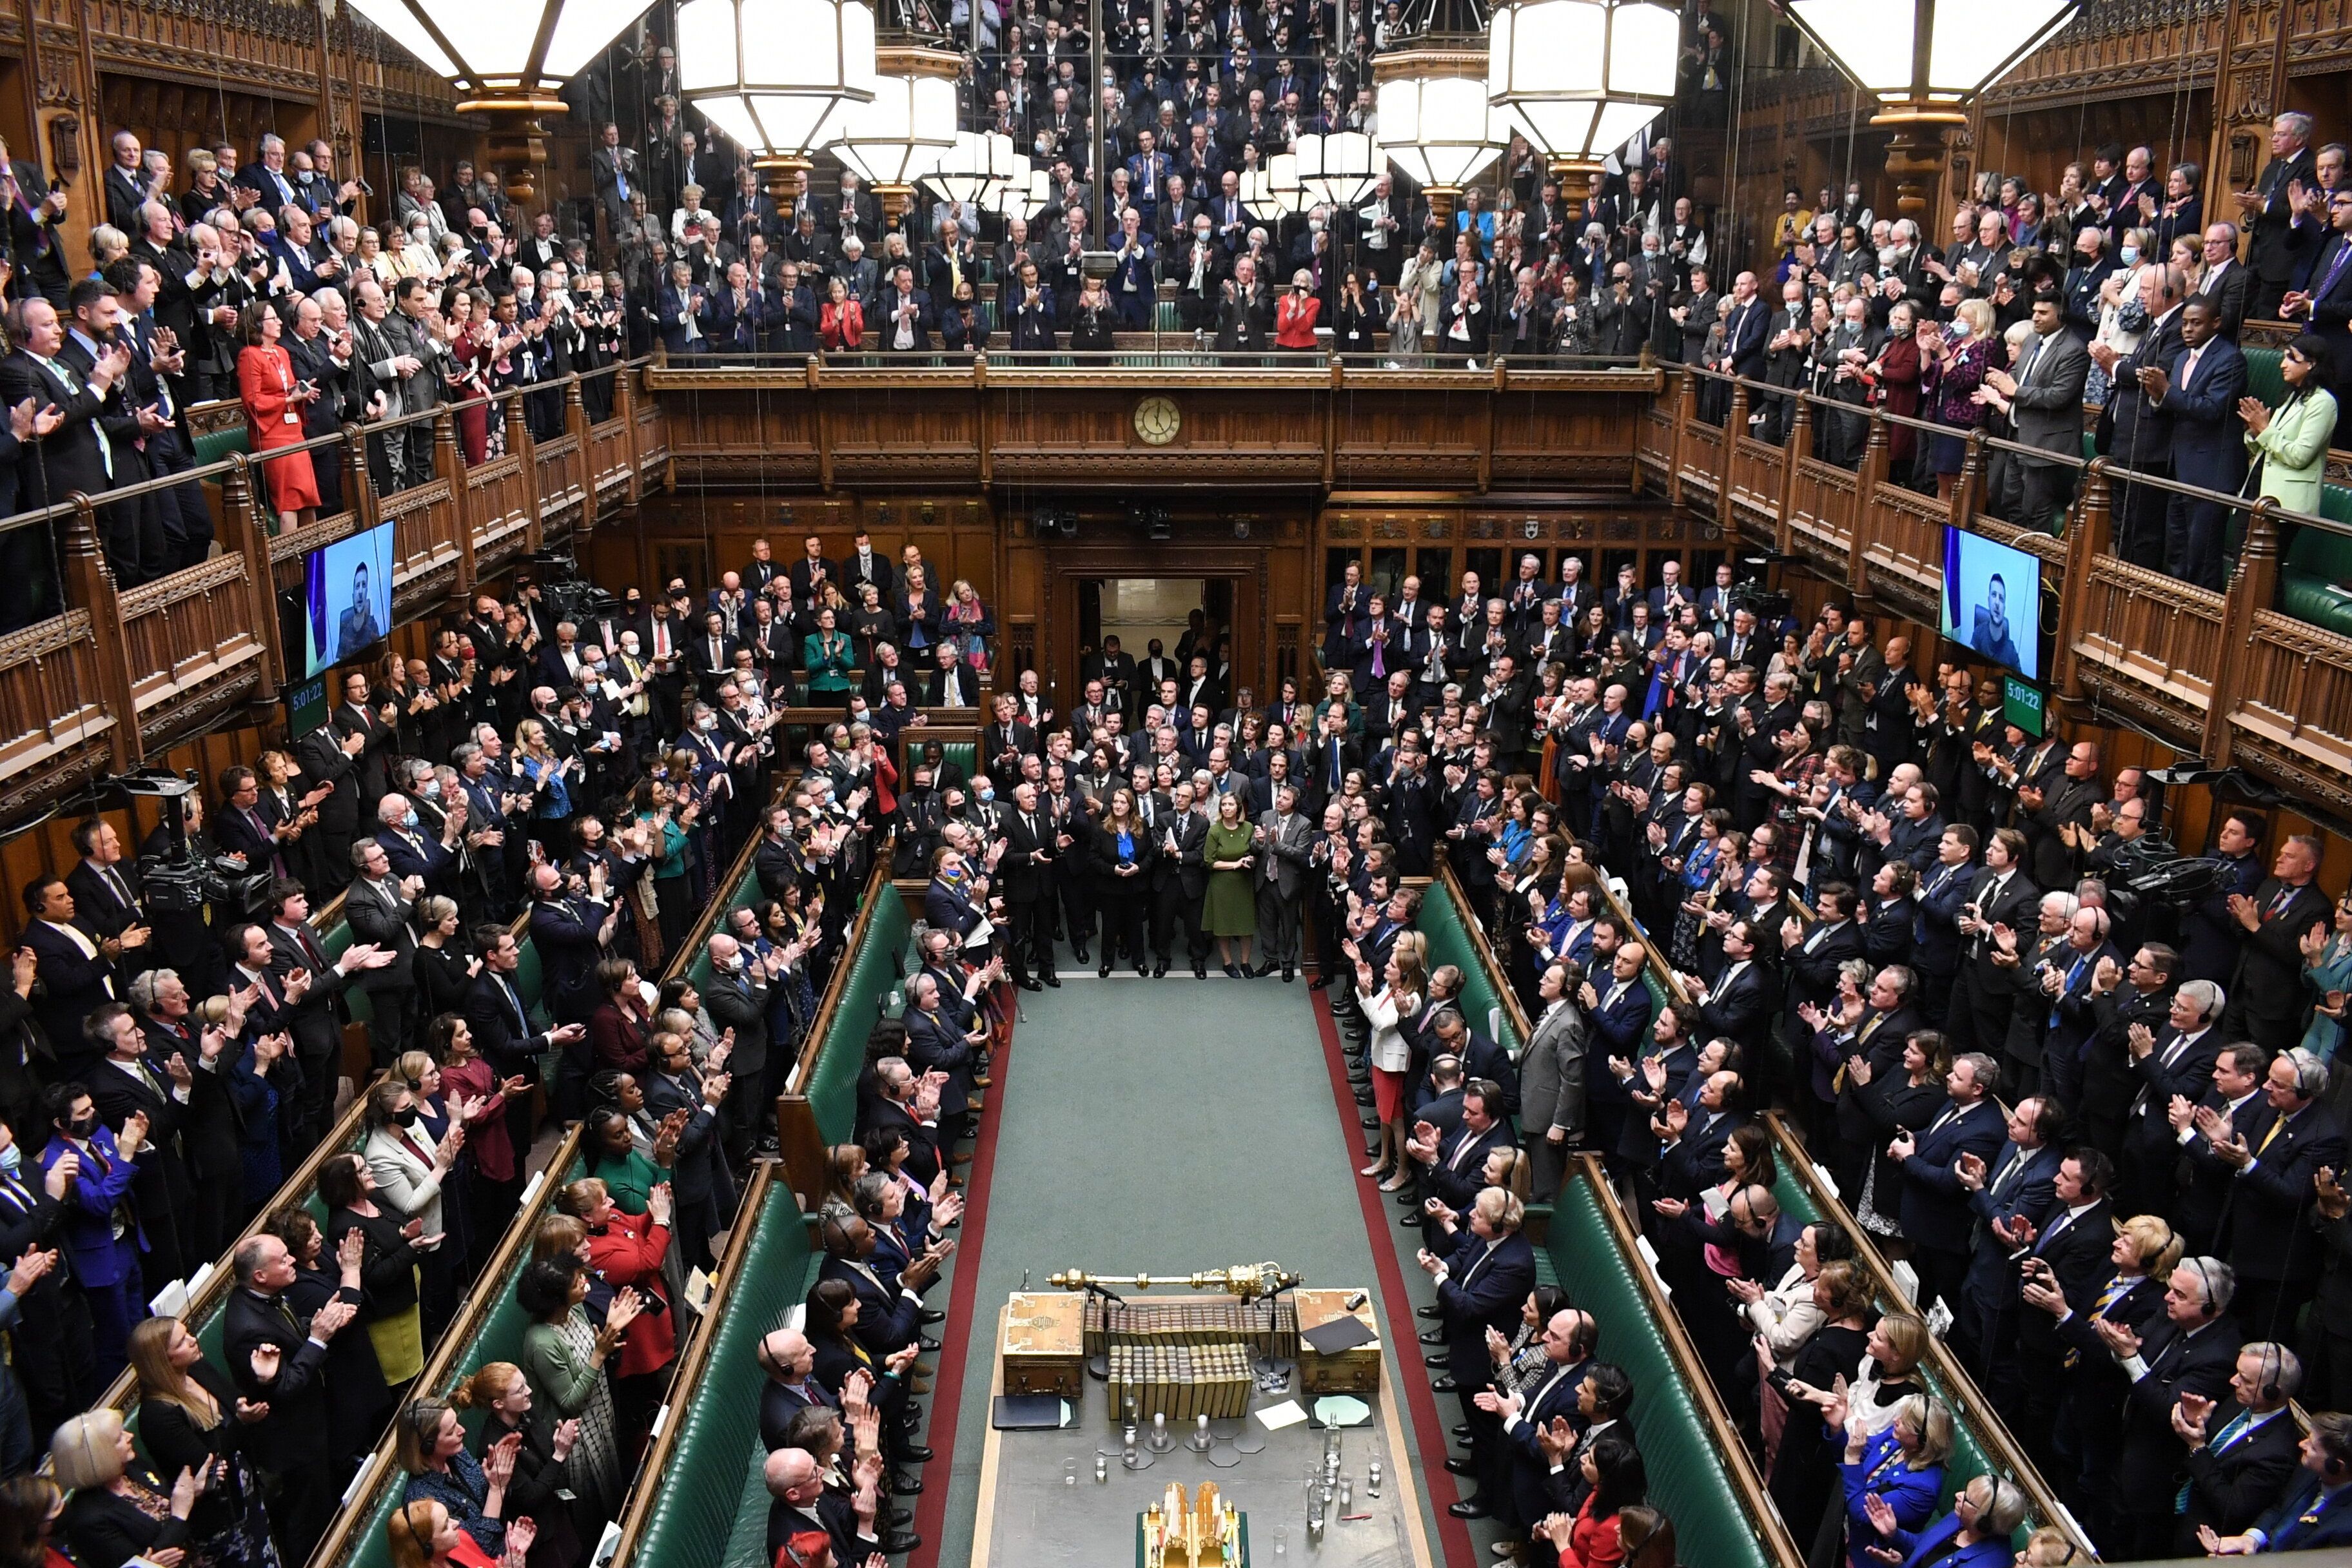 The UK parliament giving a standing ovation after to Volodymyr Zelenskyy.